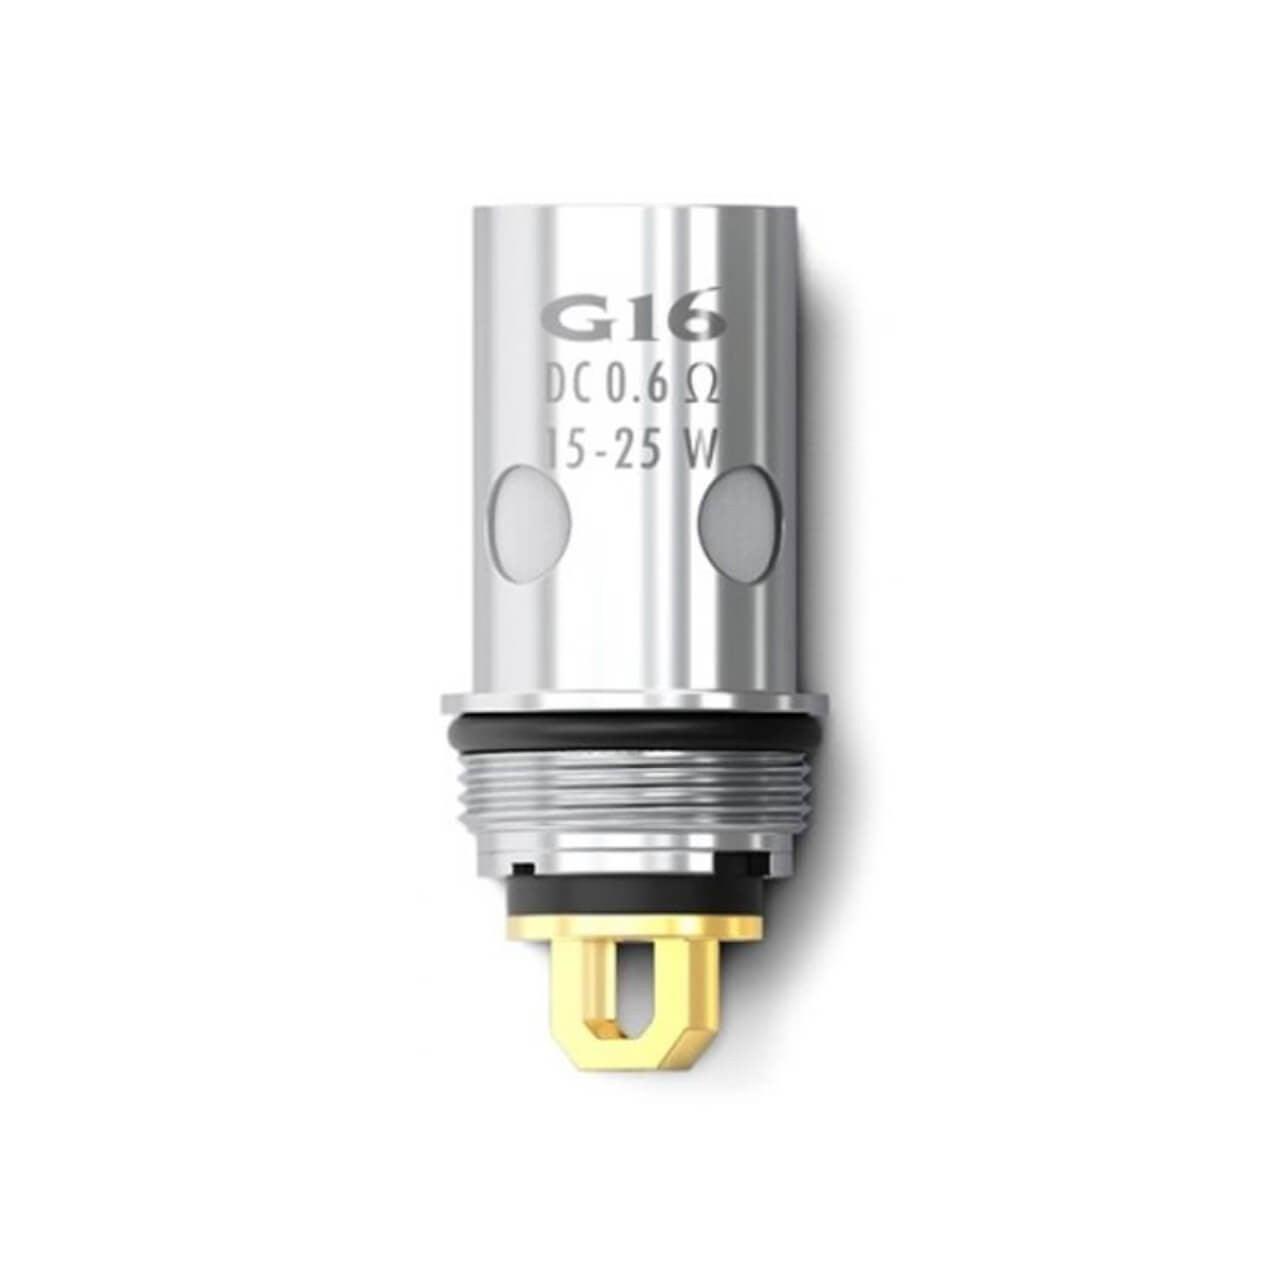 Smok G16 Replacement 0.6 Ohm Coils Compatibility